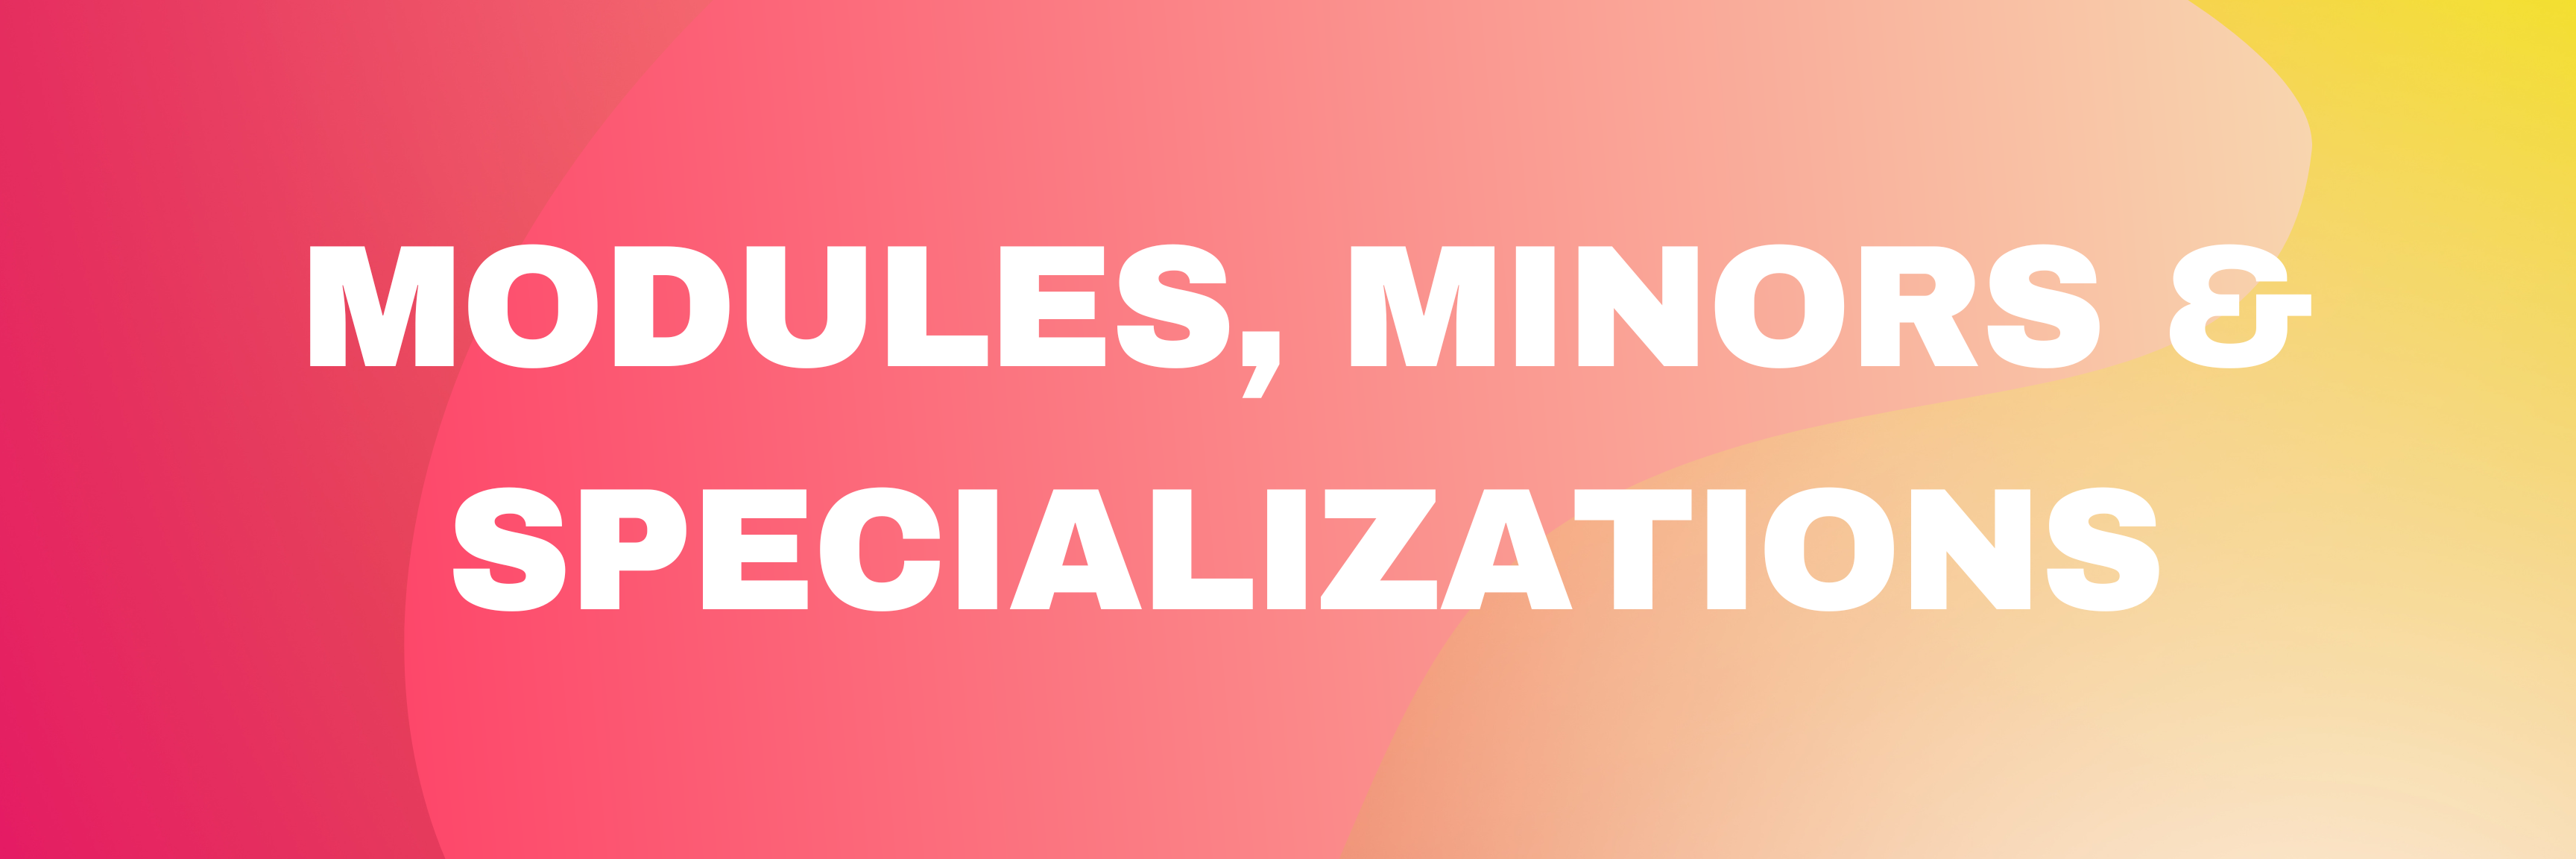 Modules, Minors & Specializations page banner